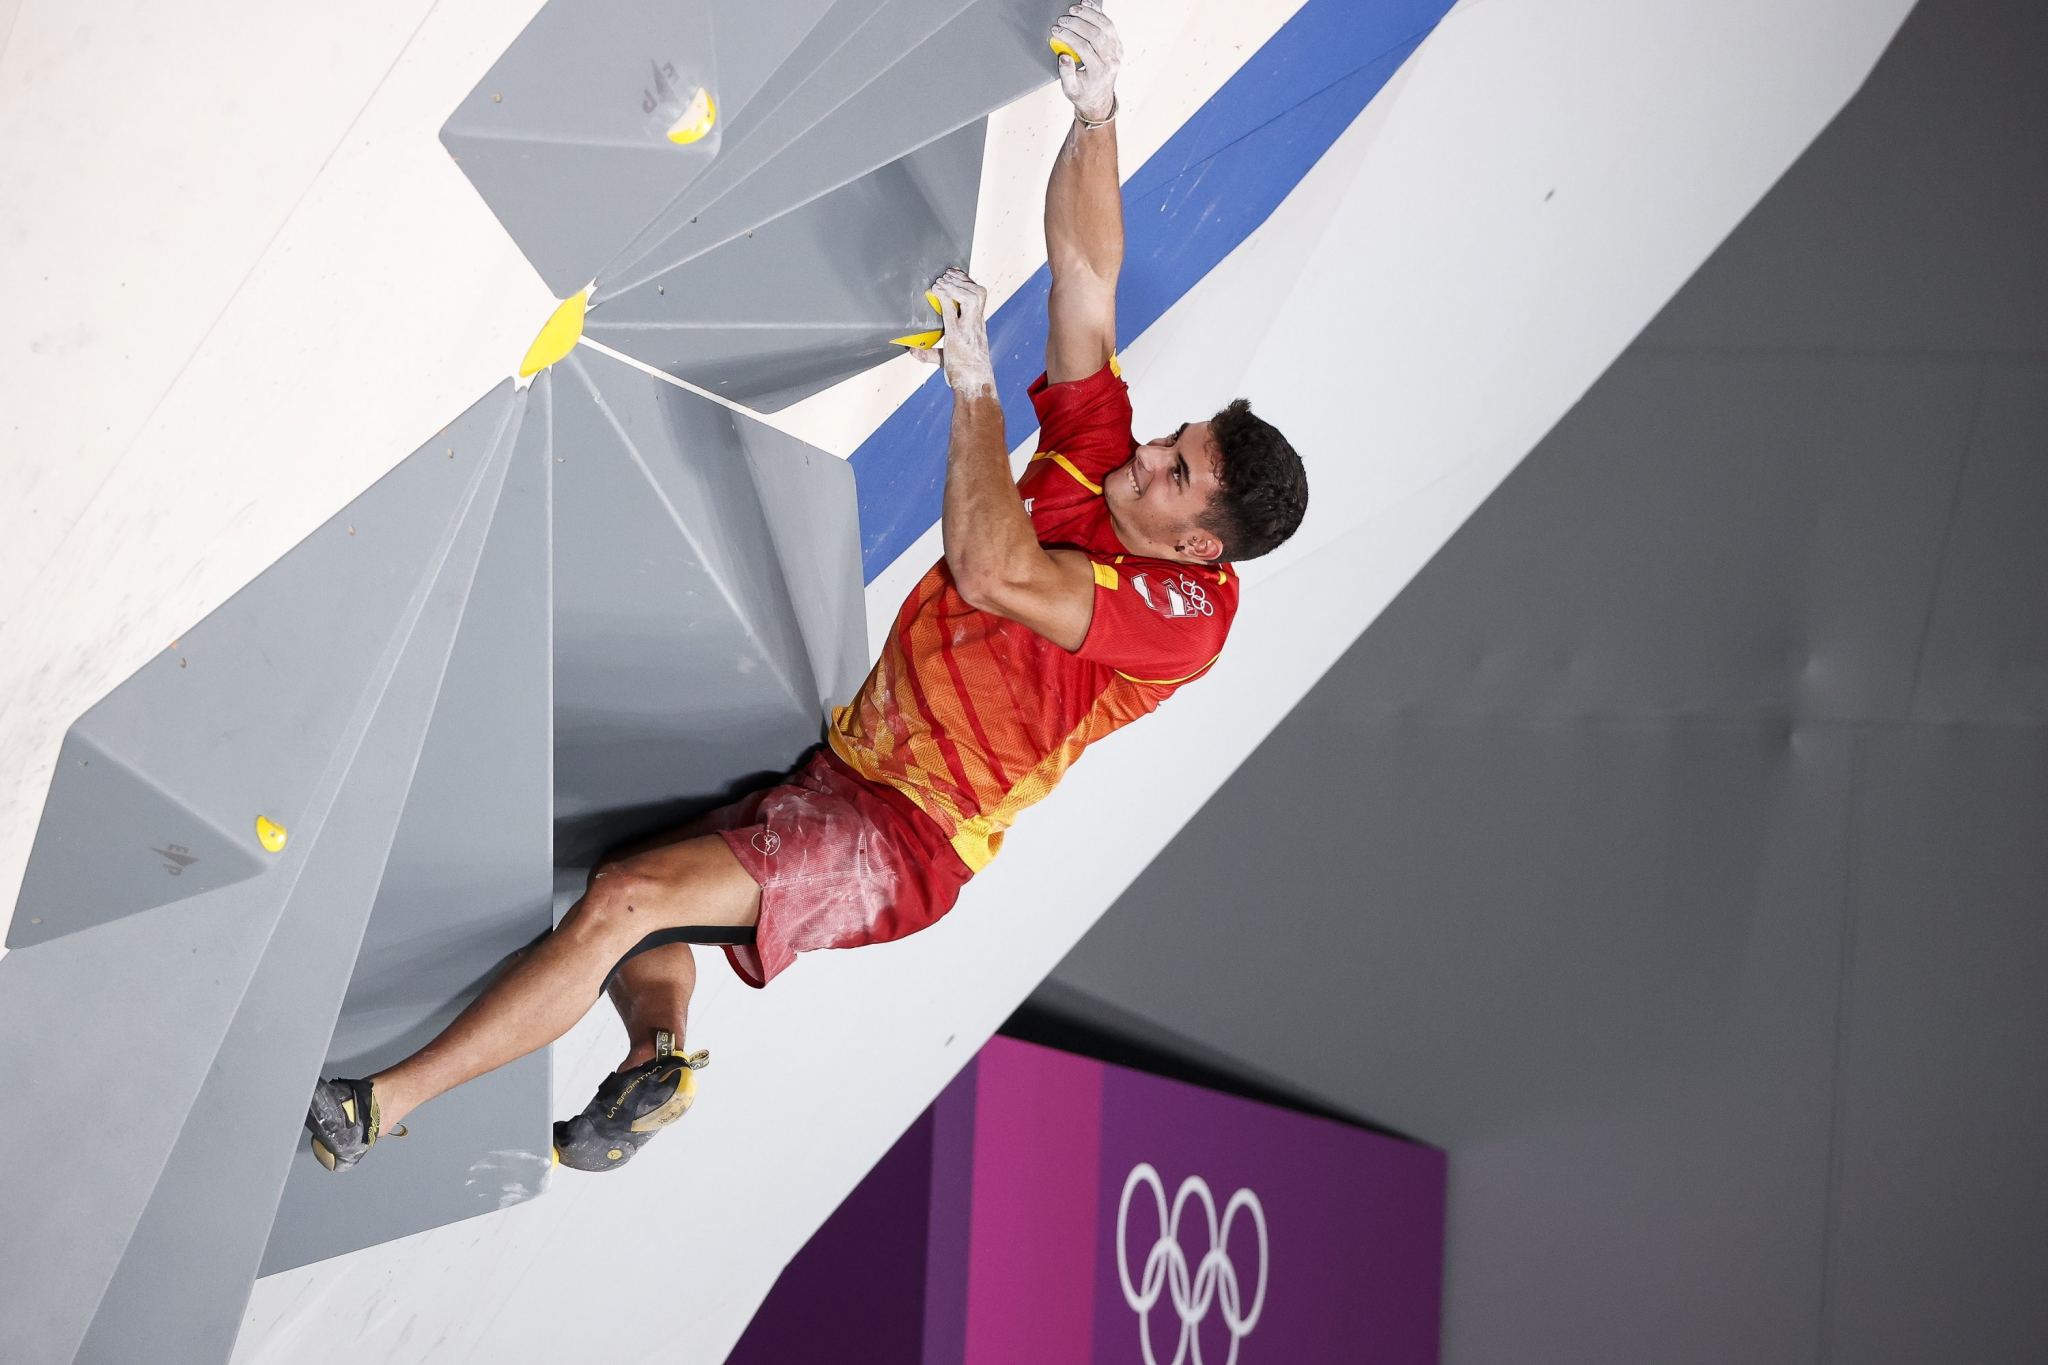 Sport climbing is one of the sports added to the Olympics to help make the Games appeal more to the youth market, but is not currently sharing in its riches ©Getty Images